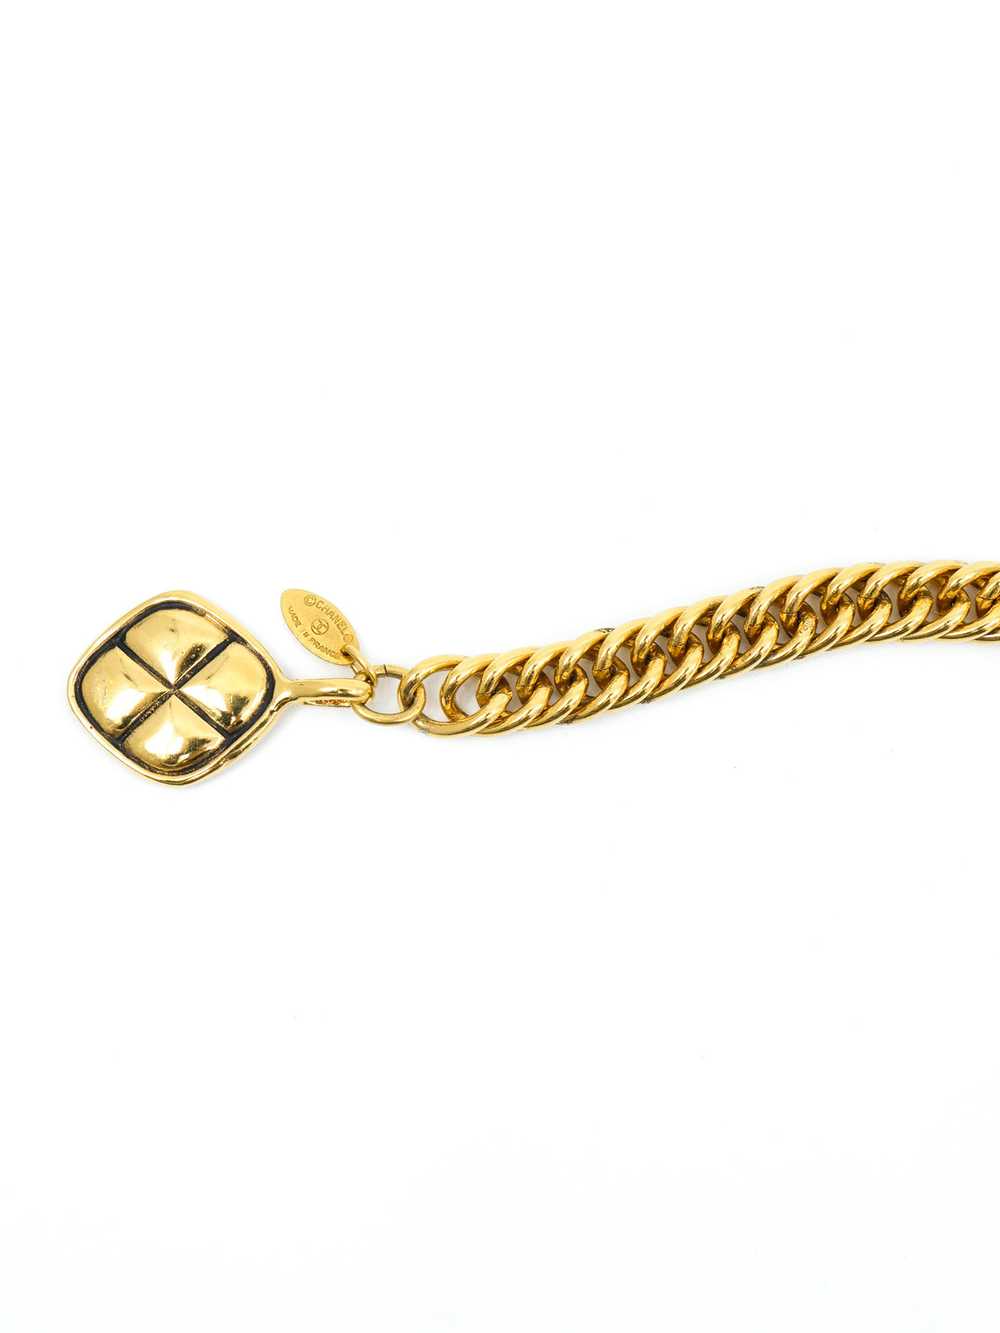 Chanel Quilted Charm Chain Belt - image 5